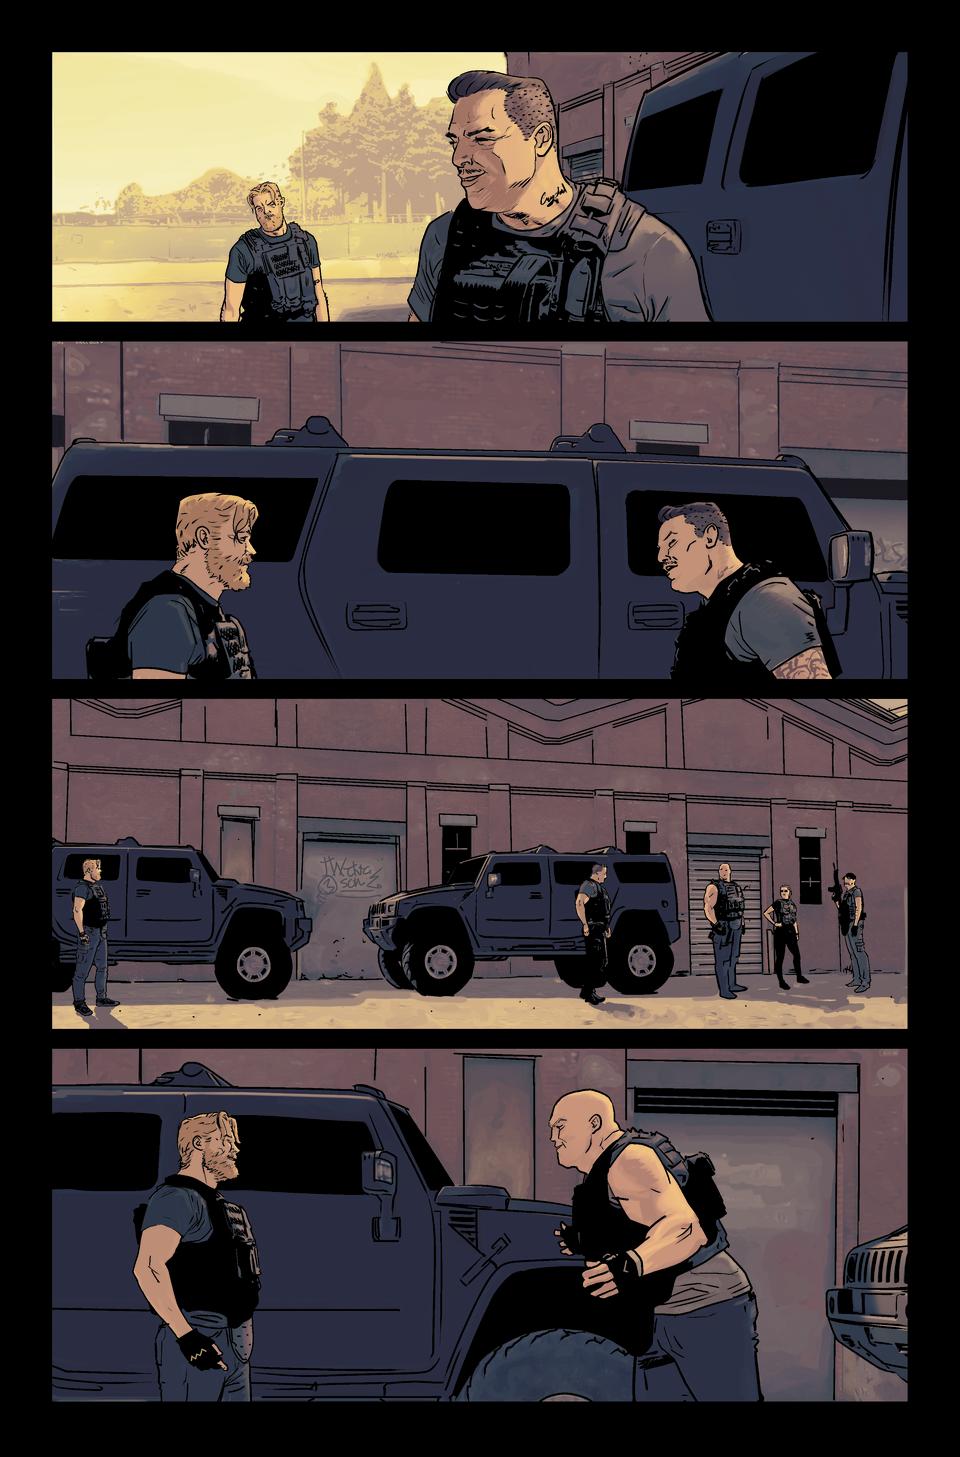 Pages from Sins of the Salton Sea #1.